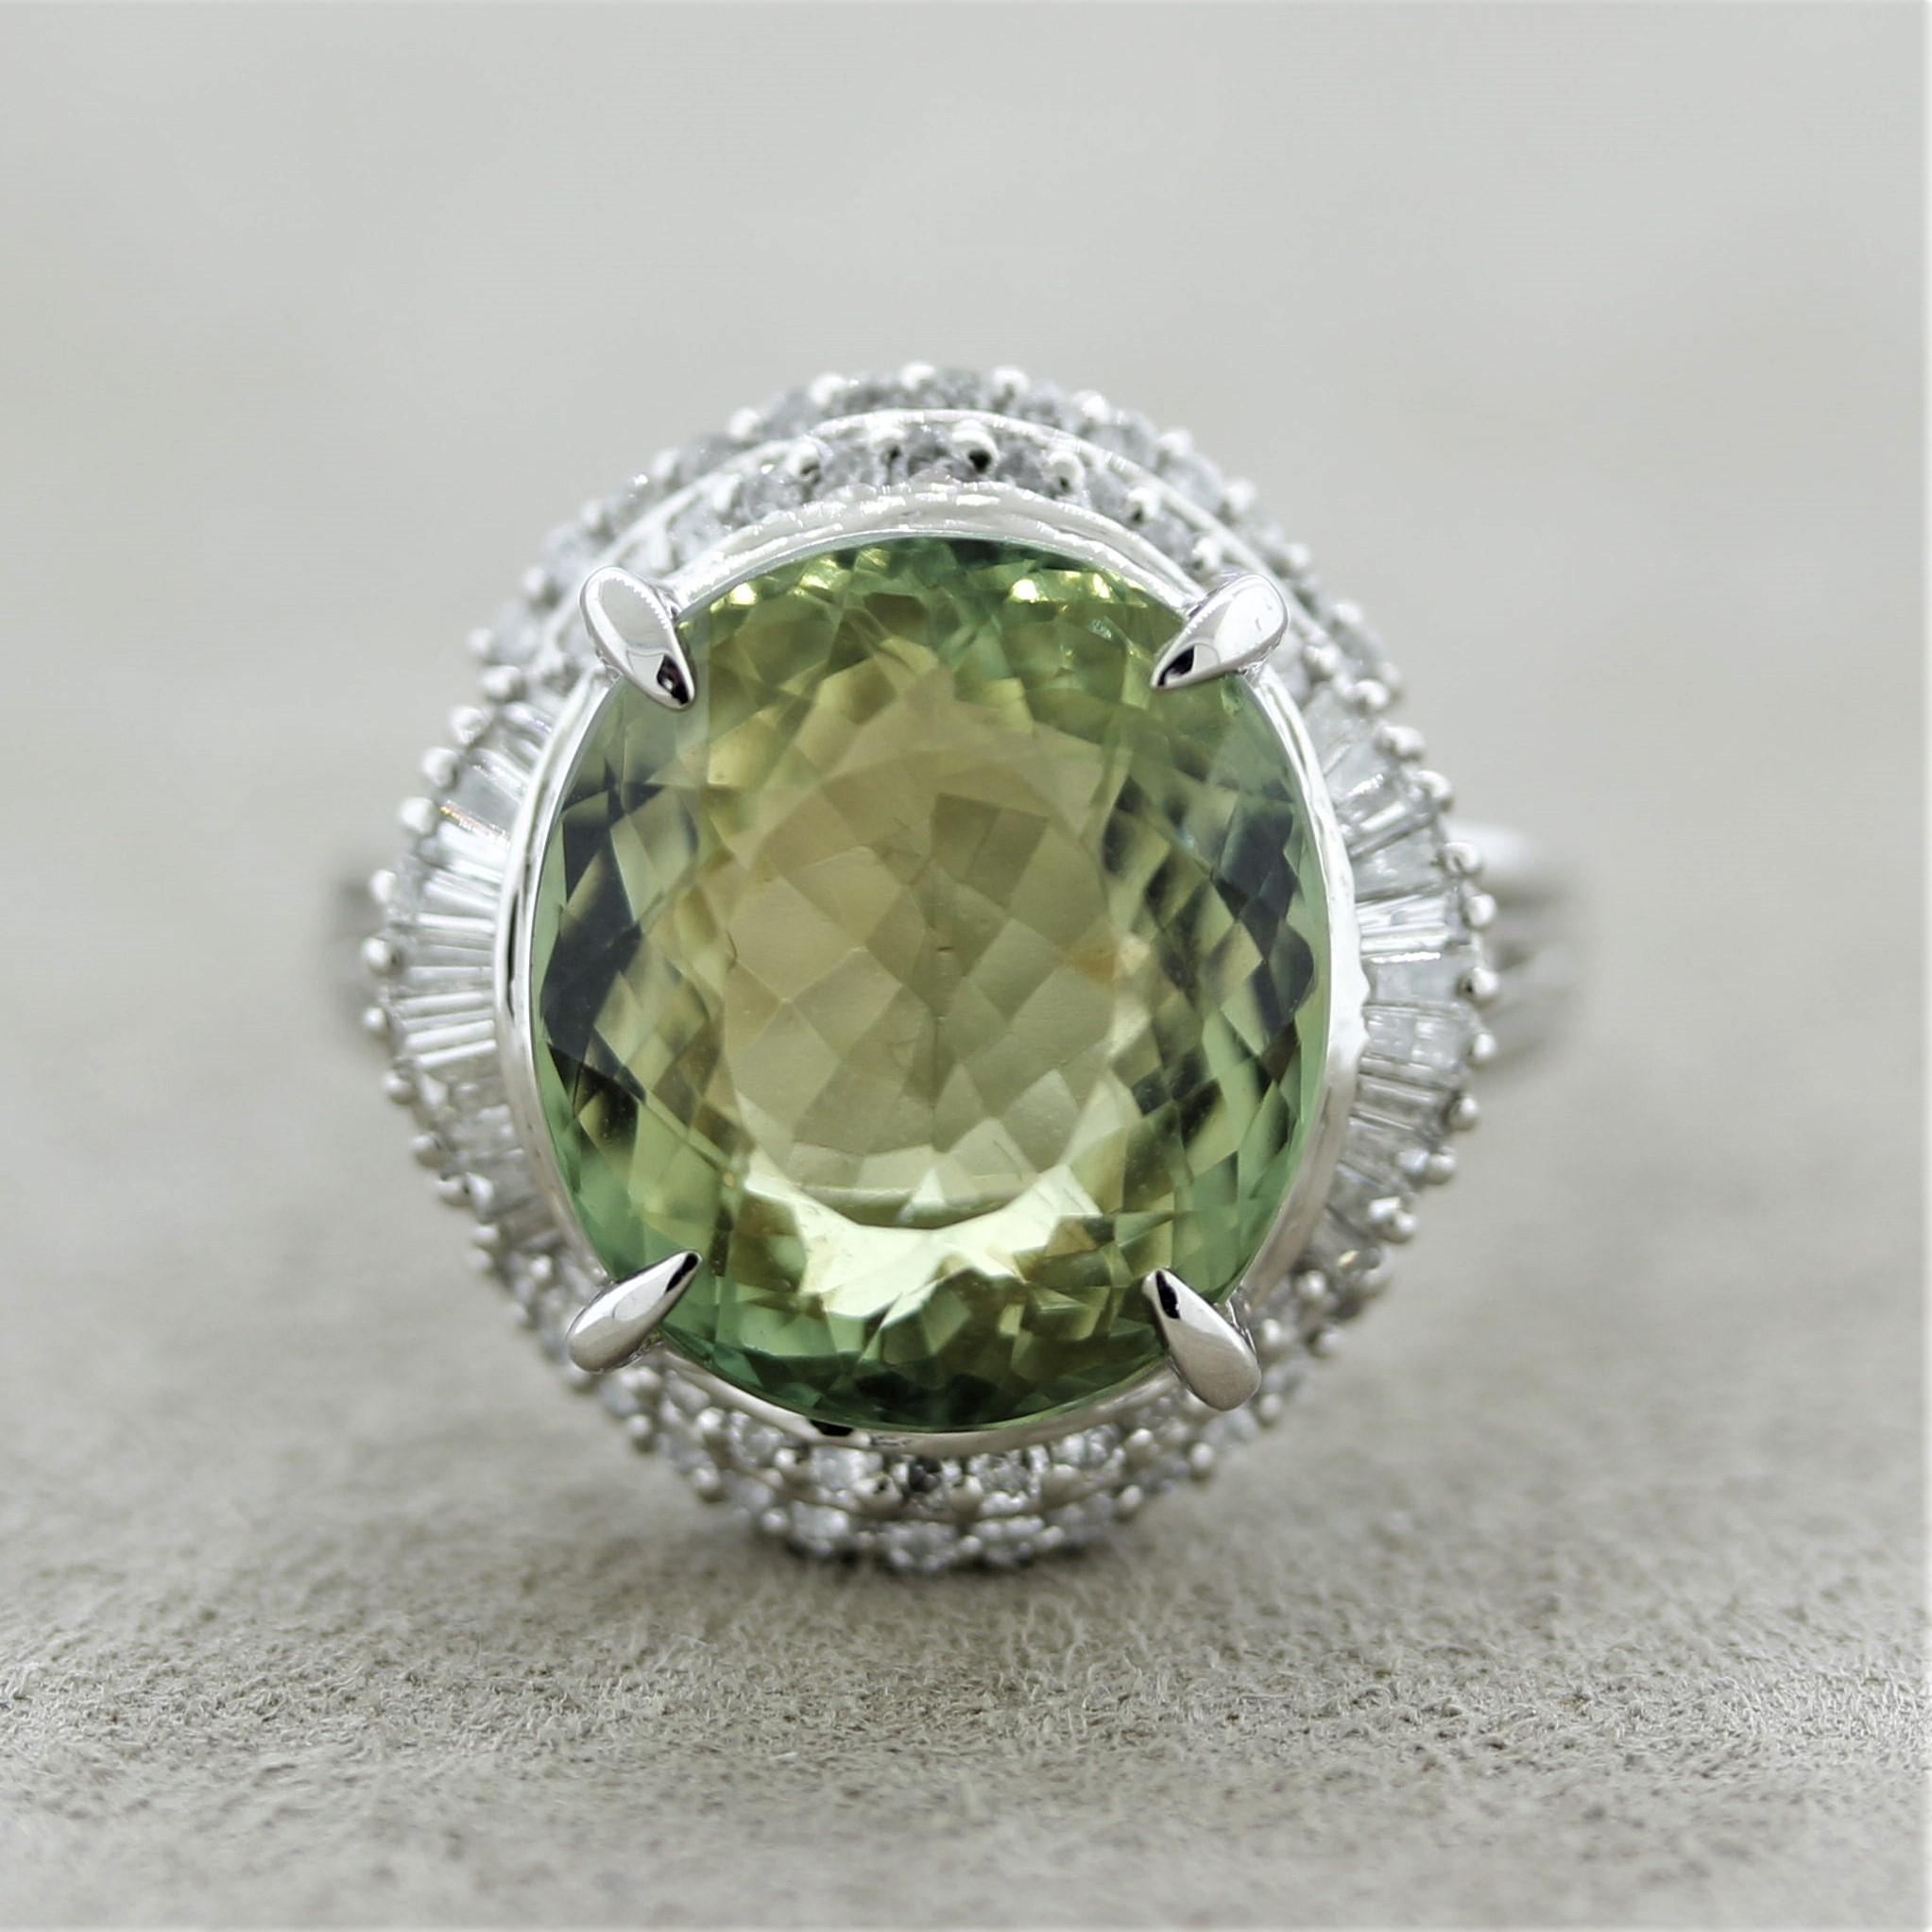 A 10.50 carat tourmaline with a lively lime-green color takes center stage. It is accented by 0.50 carats of round and baguette-cut diamonds set around the tourmaline in a stylish pattern. Hand-fabricated in platinum and ready to be worn.

Ring Size